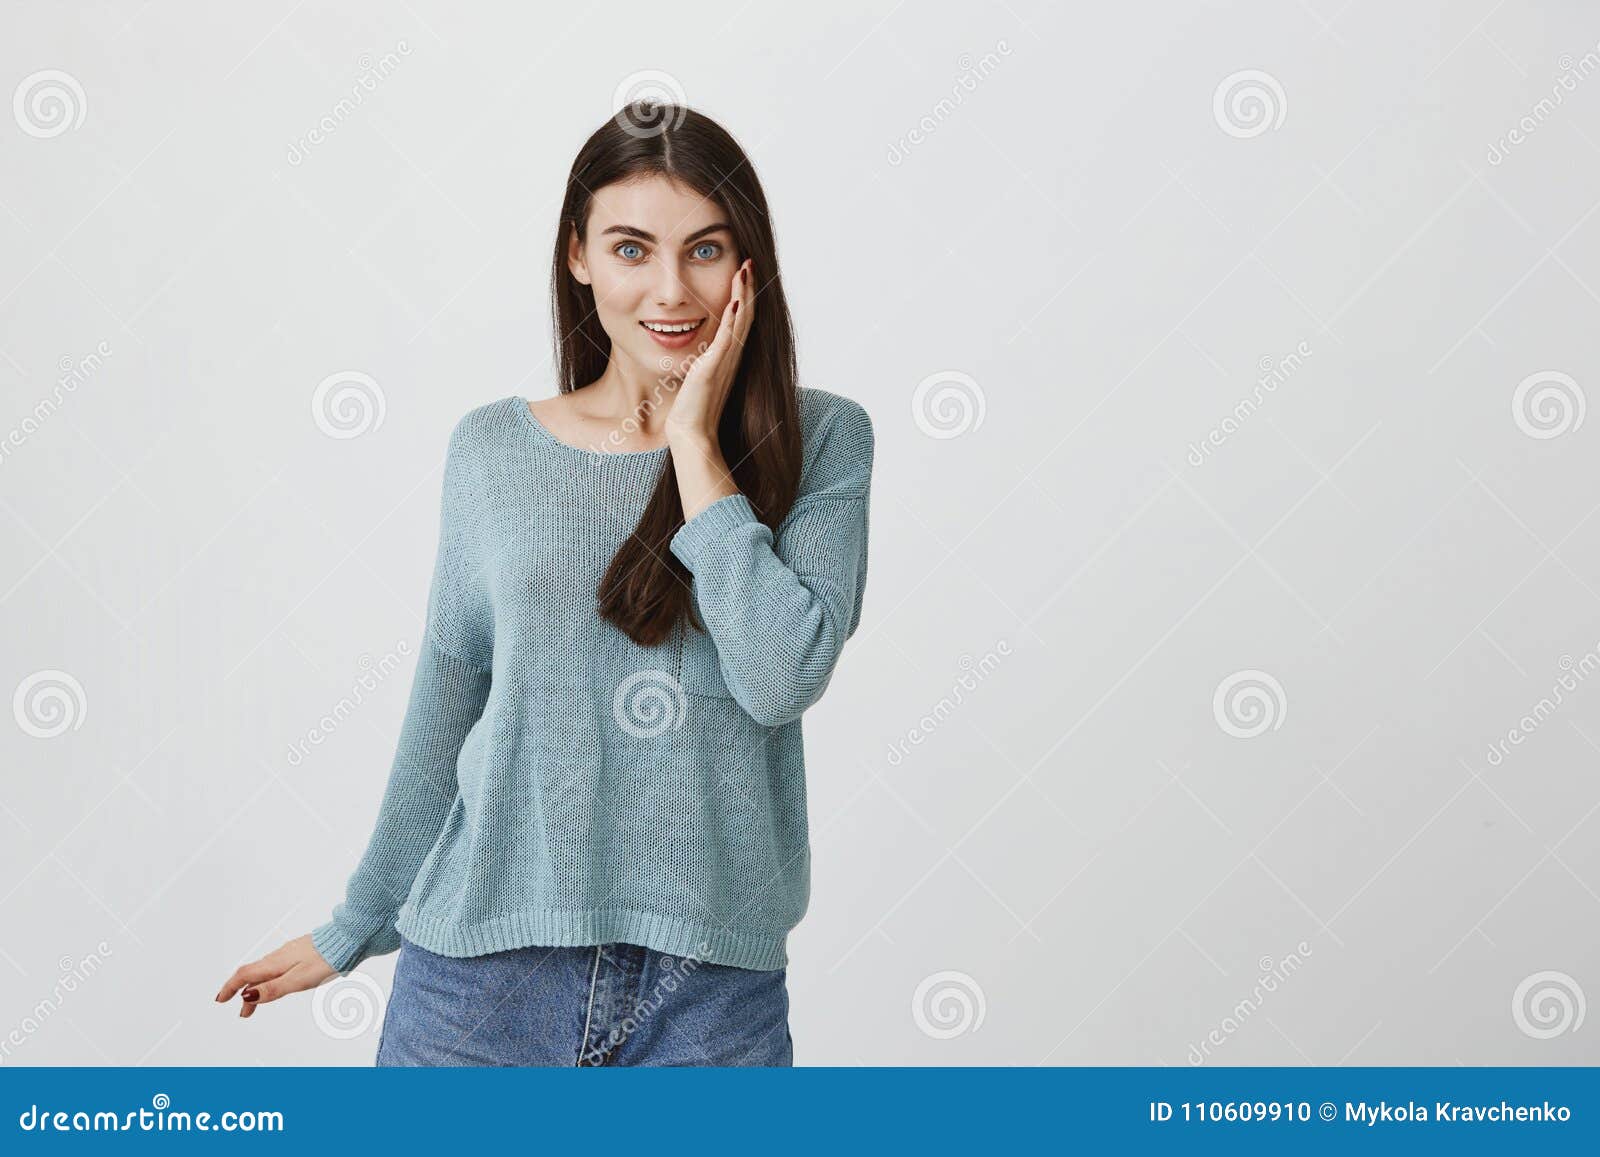 Cute and Tender Caucasian Female Expressing Surprise, Standing with ...